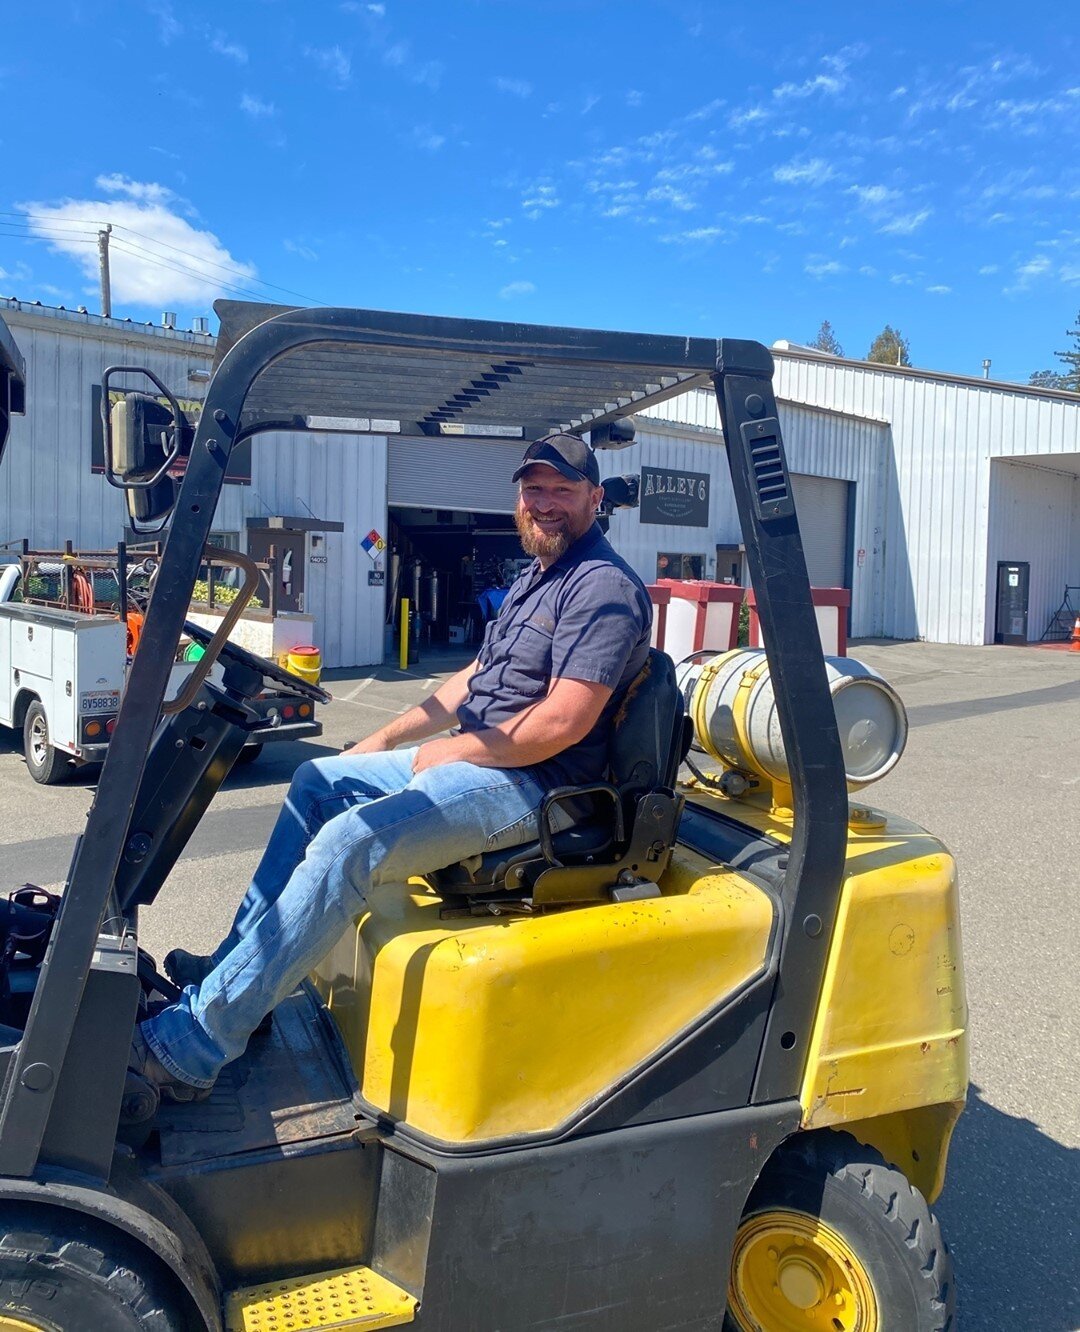 Some people drive a Ford 🚗⁠
⁠
Jason drives a forklift 🤠⁠
⁠
⁠
#alley6 #alley6craftdistillery #craftdistillery #distillery #craftdistilling #craftspirit #craftspirits #healdsburgdistillery⁠
#healdsburglife #sonomawinecountry #whiskeyinwinecountry #tr